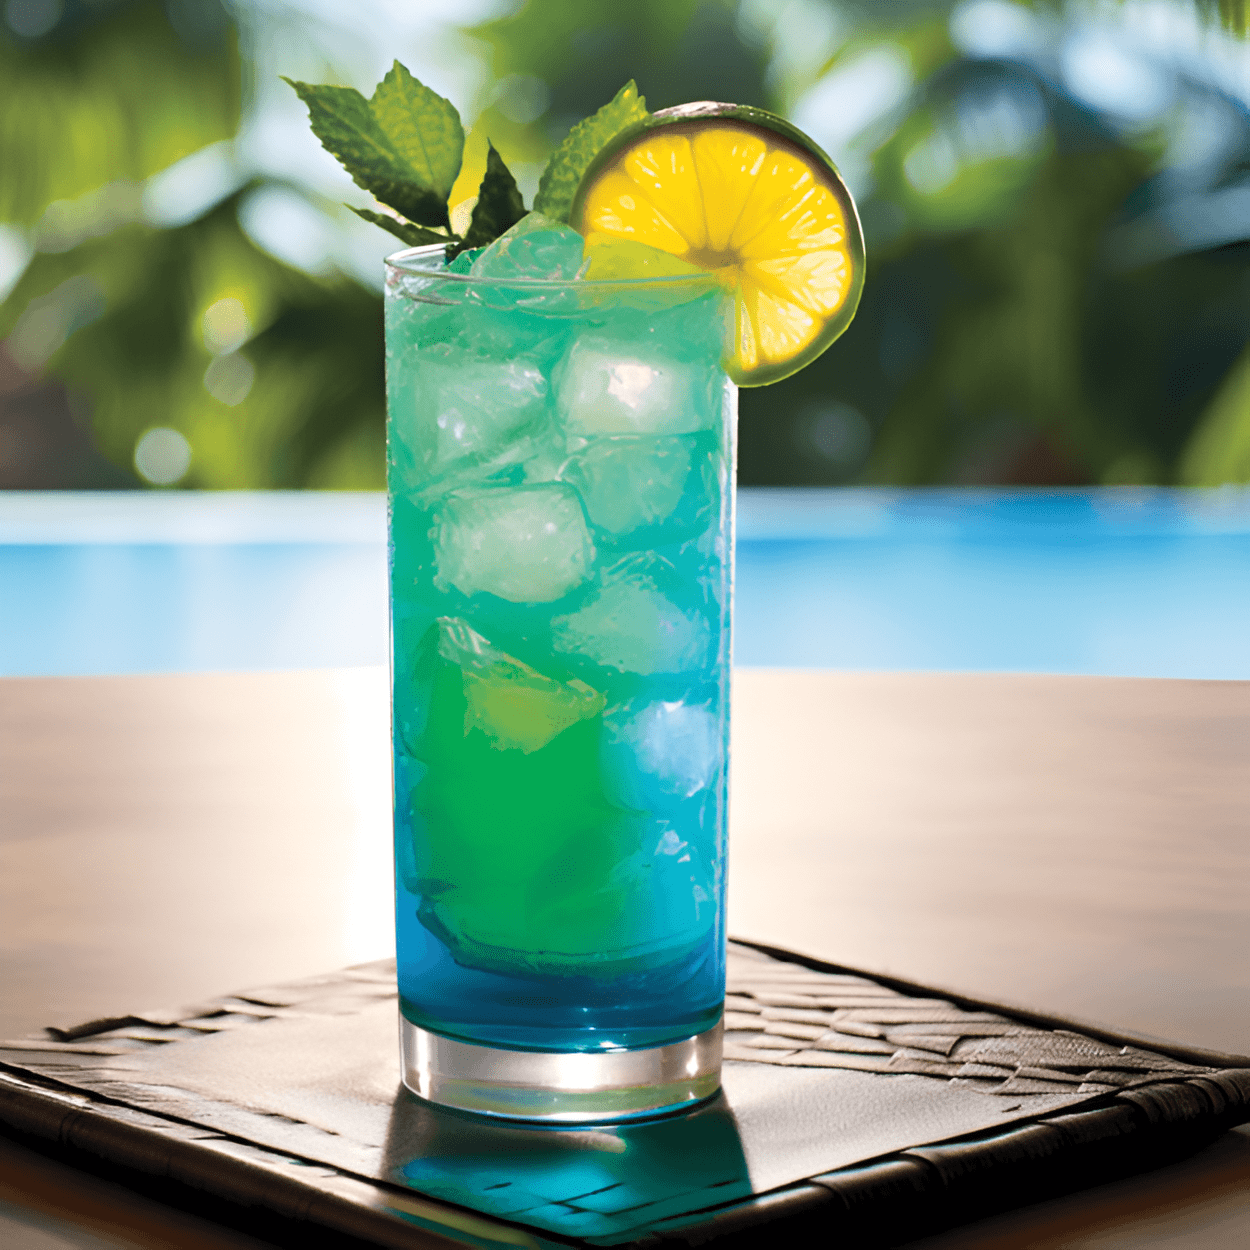 Holy Water Cocktail Recipe - The Holy Water Cocktail is a delightful blend of sweet and sour. The fruity flavors of the pineapple and blue curacao are balanced by the tartness of the lime. The vodka adds a strong, smooth kick that makes this cocktail a refreshing and invigorating drink.